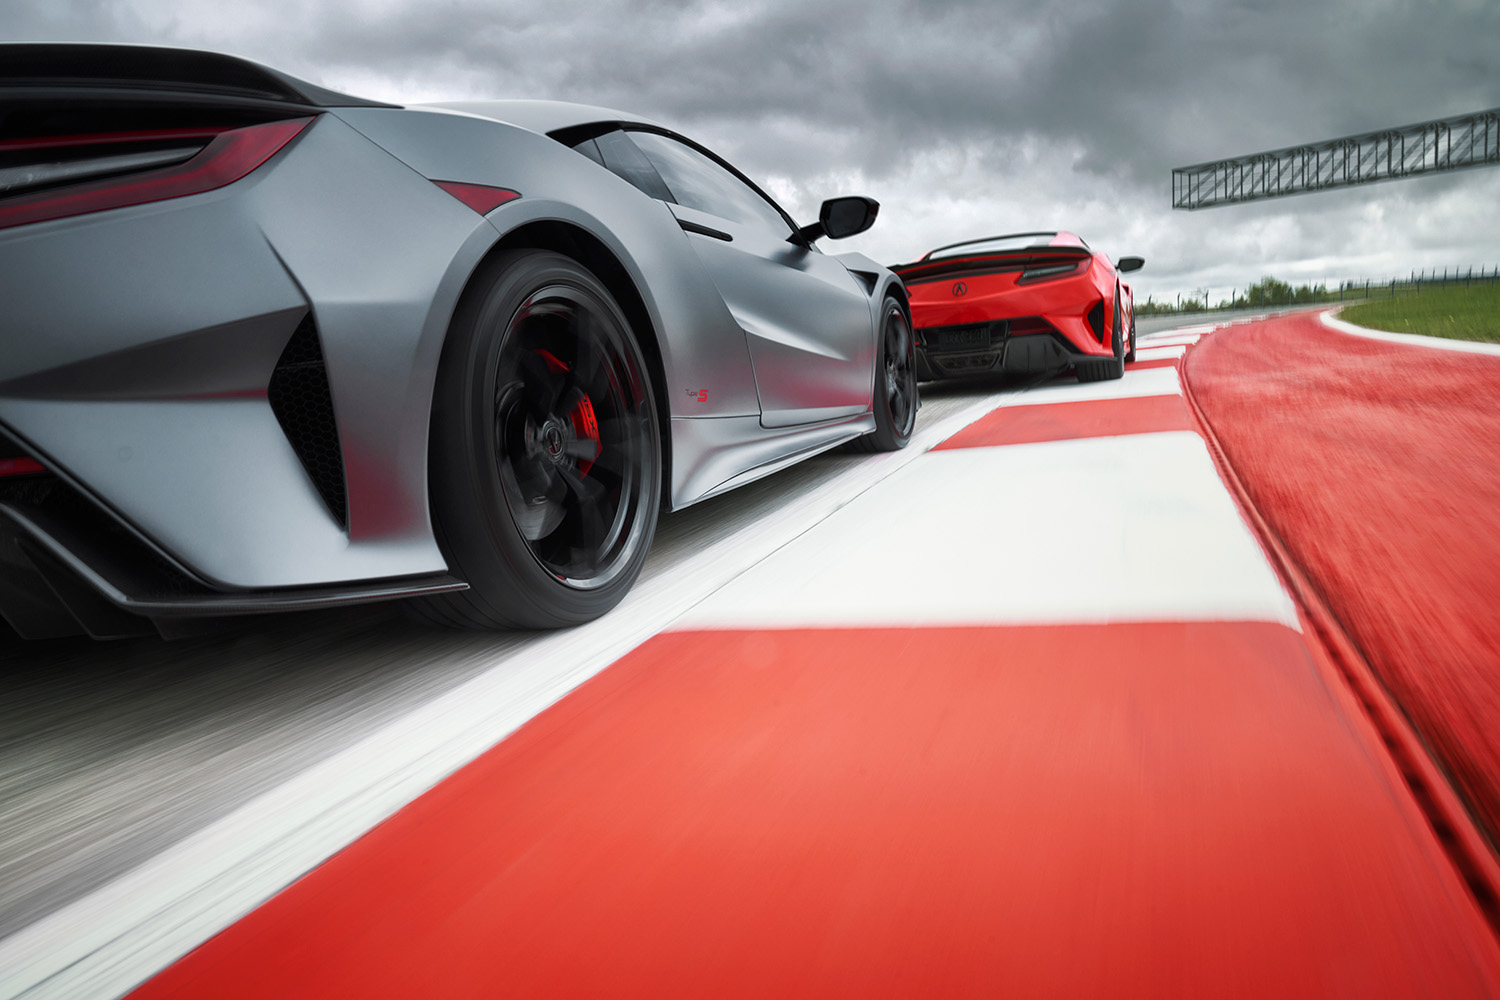 Close follow wheel shot on rumble strip as pair of 2022 Acura NSX Type S models race on track